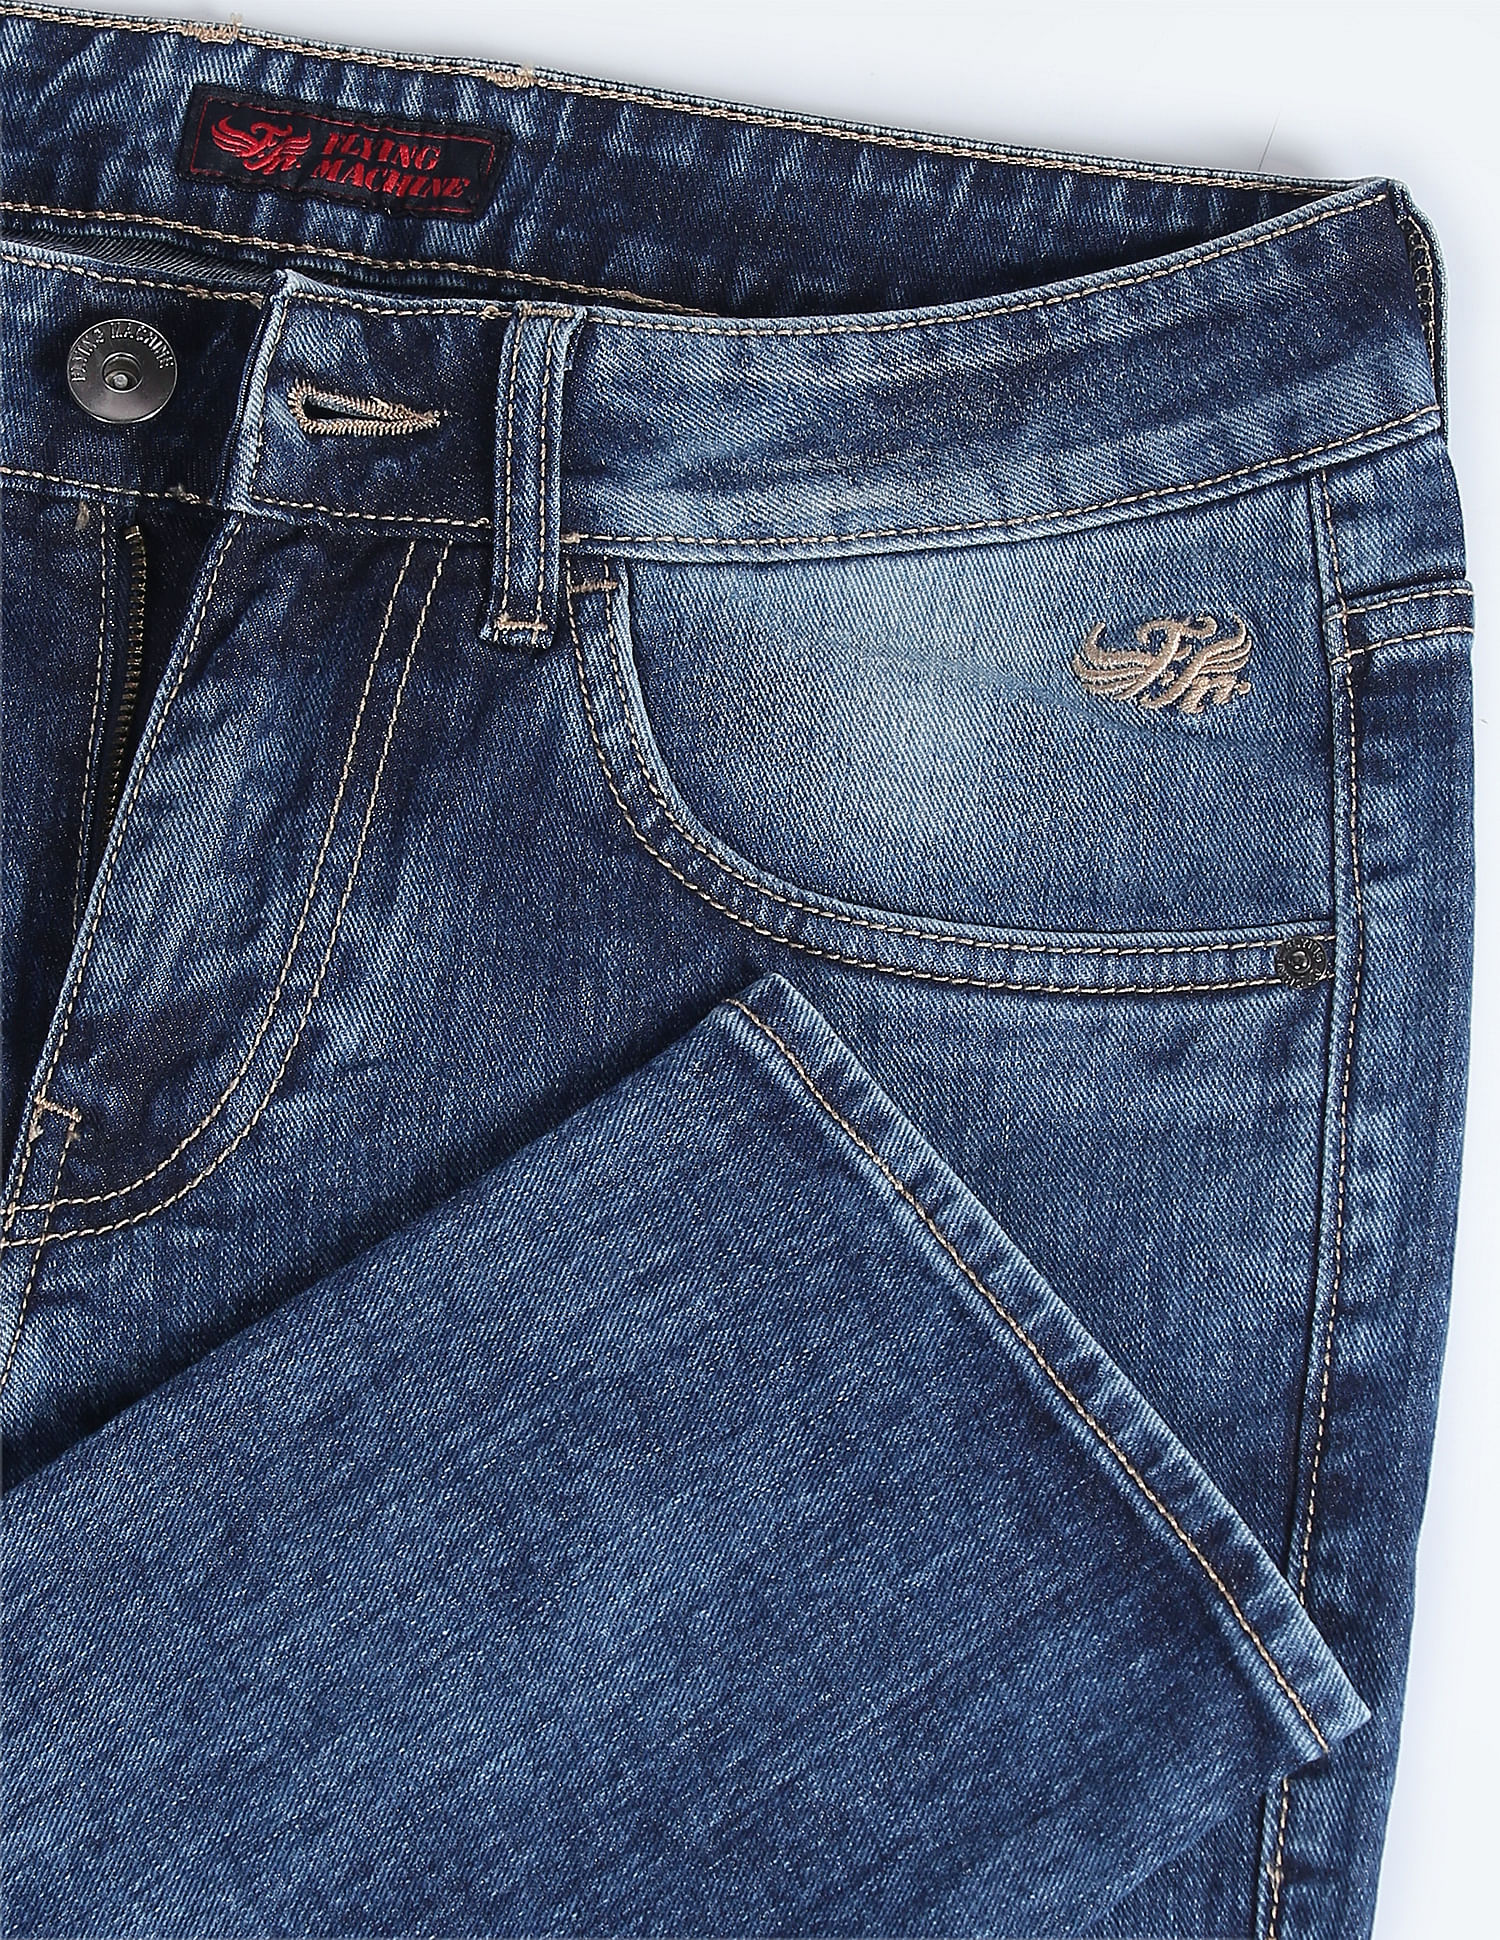 Jeans & Trousers | Flying Machine Denim Jeans For Women | Freeup